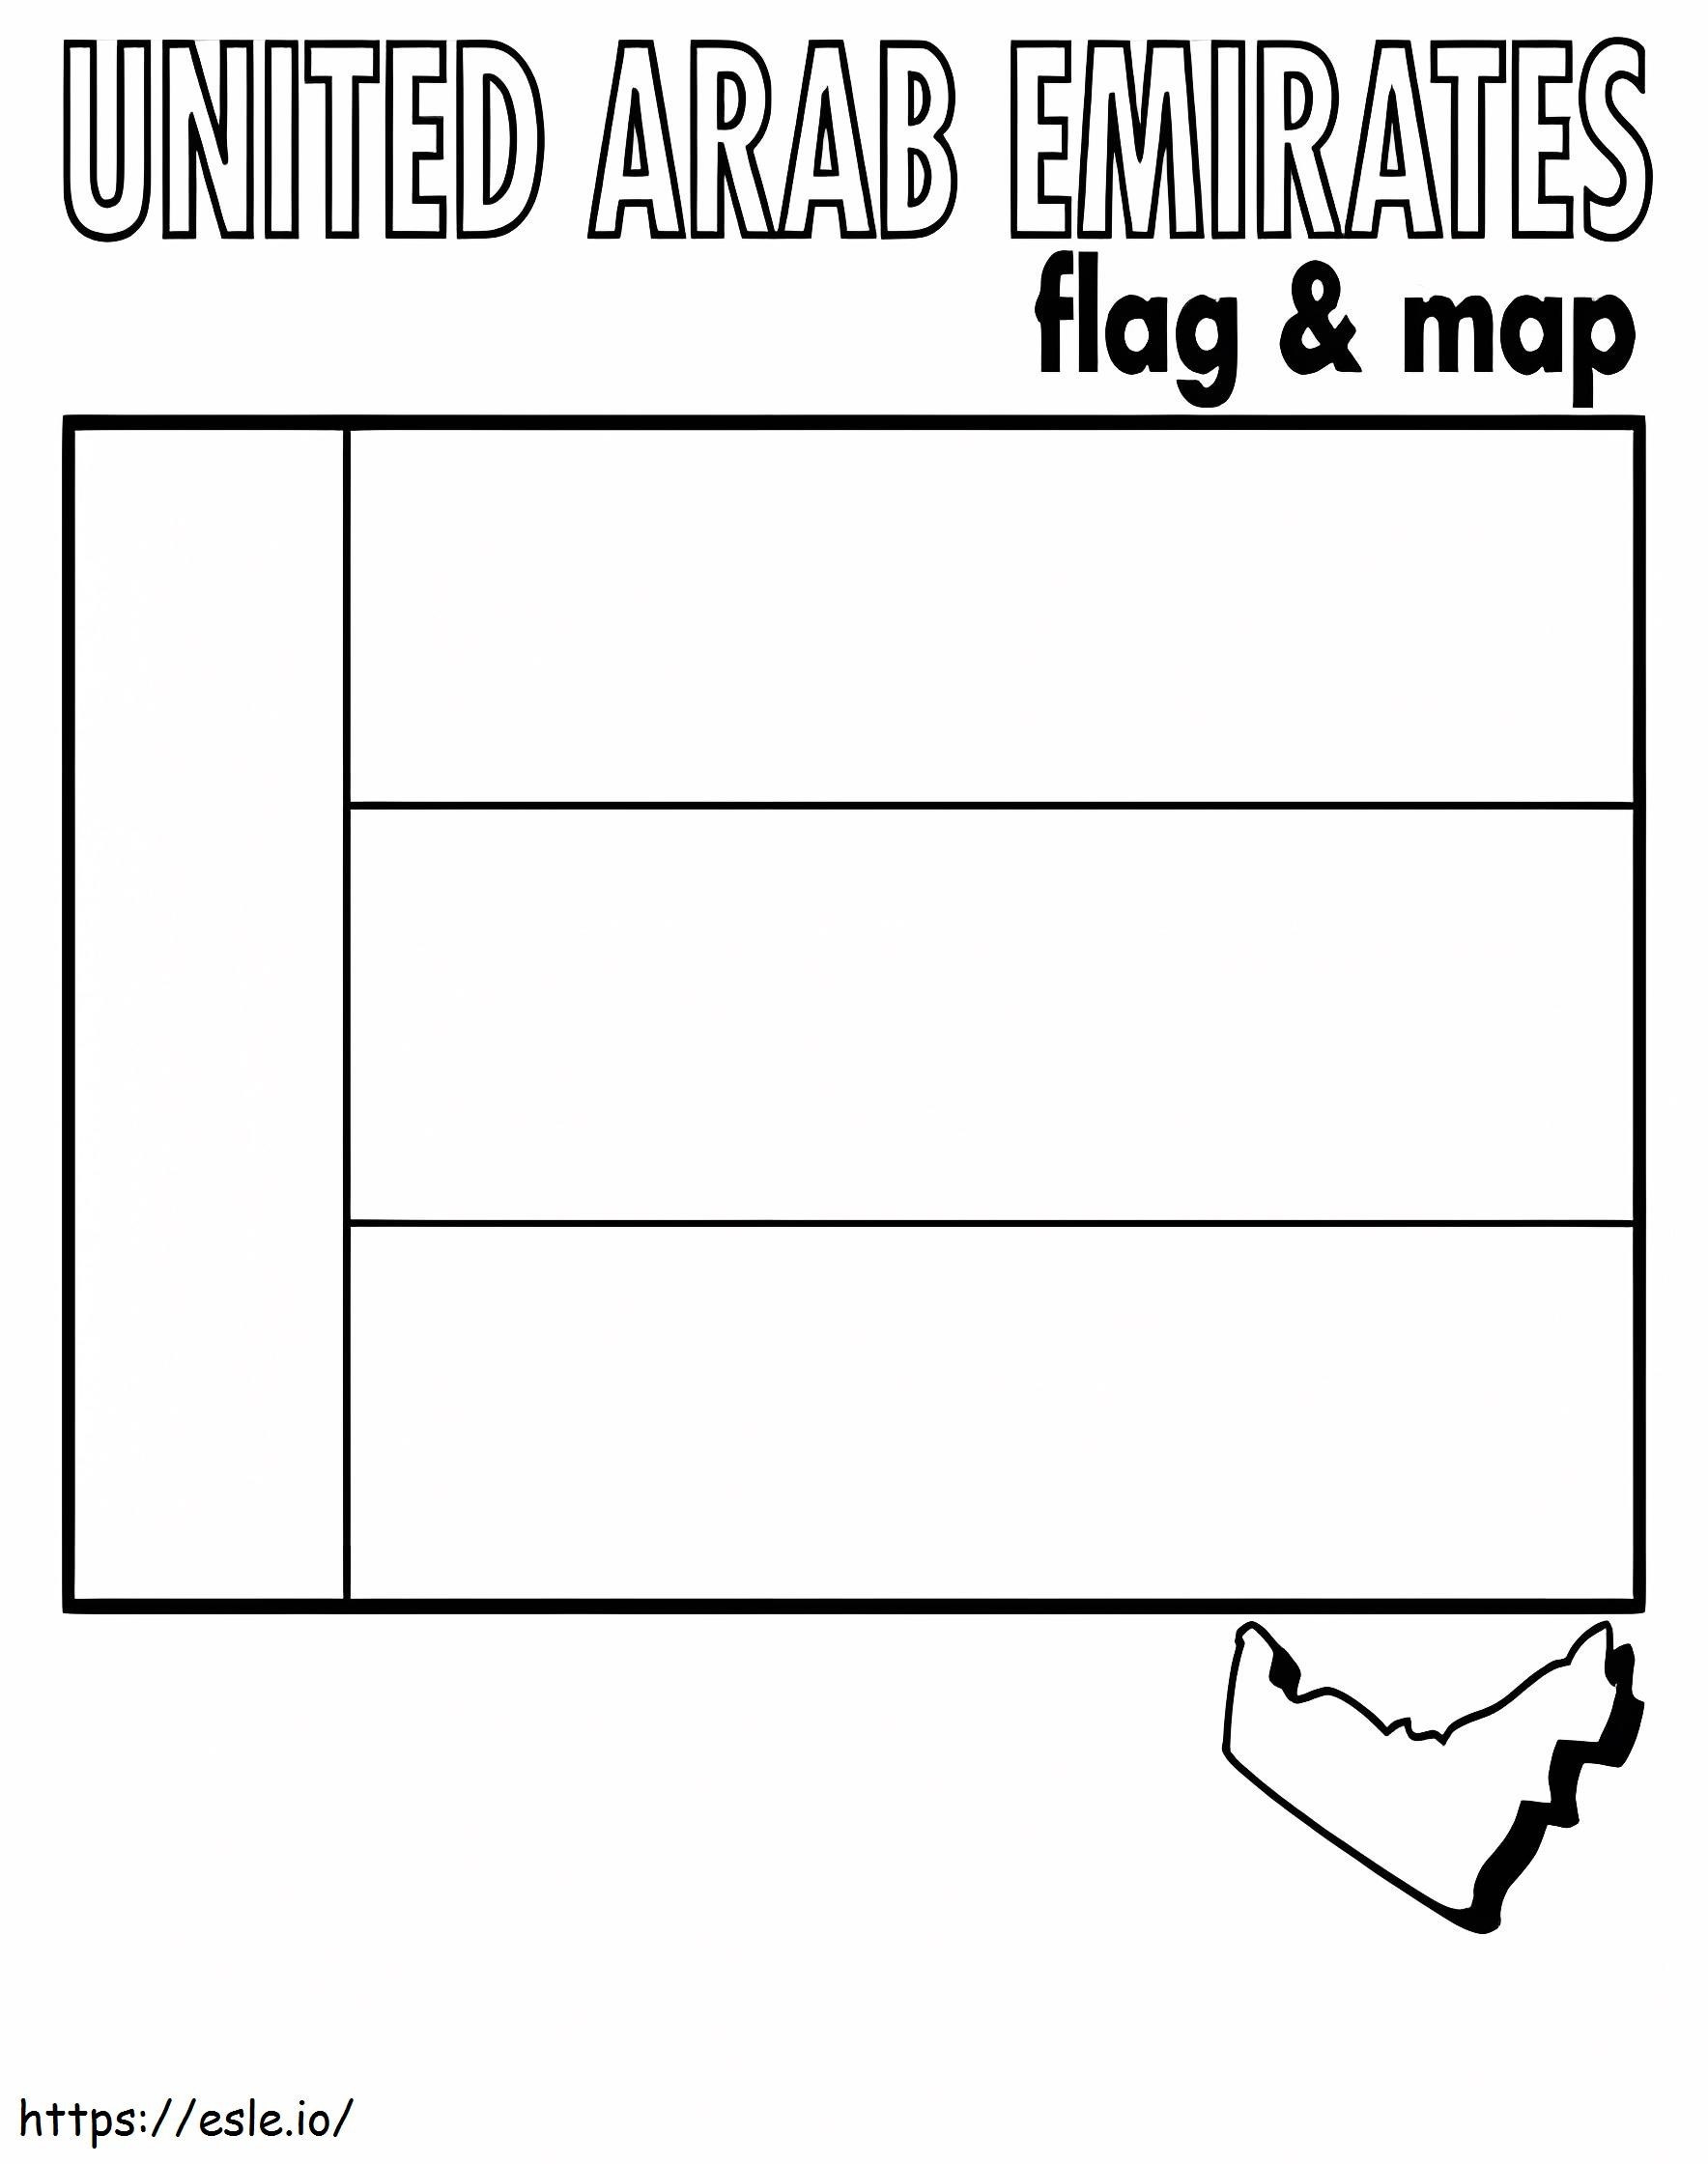 United Arab Emirates Flag And Map coloring page